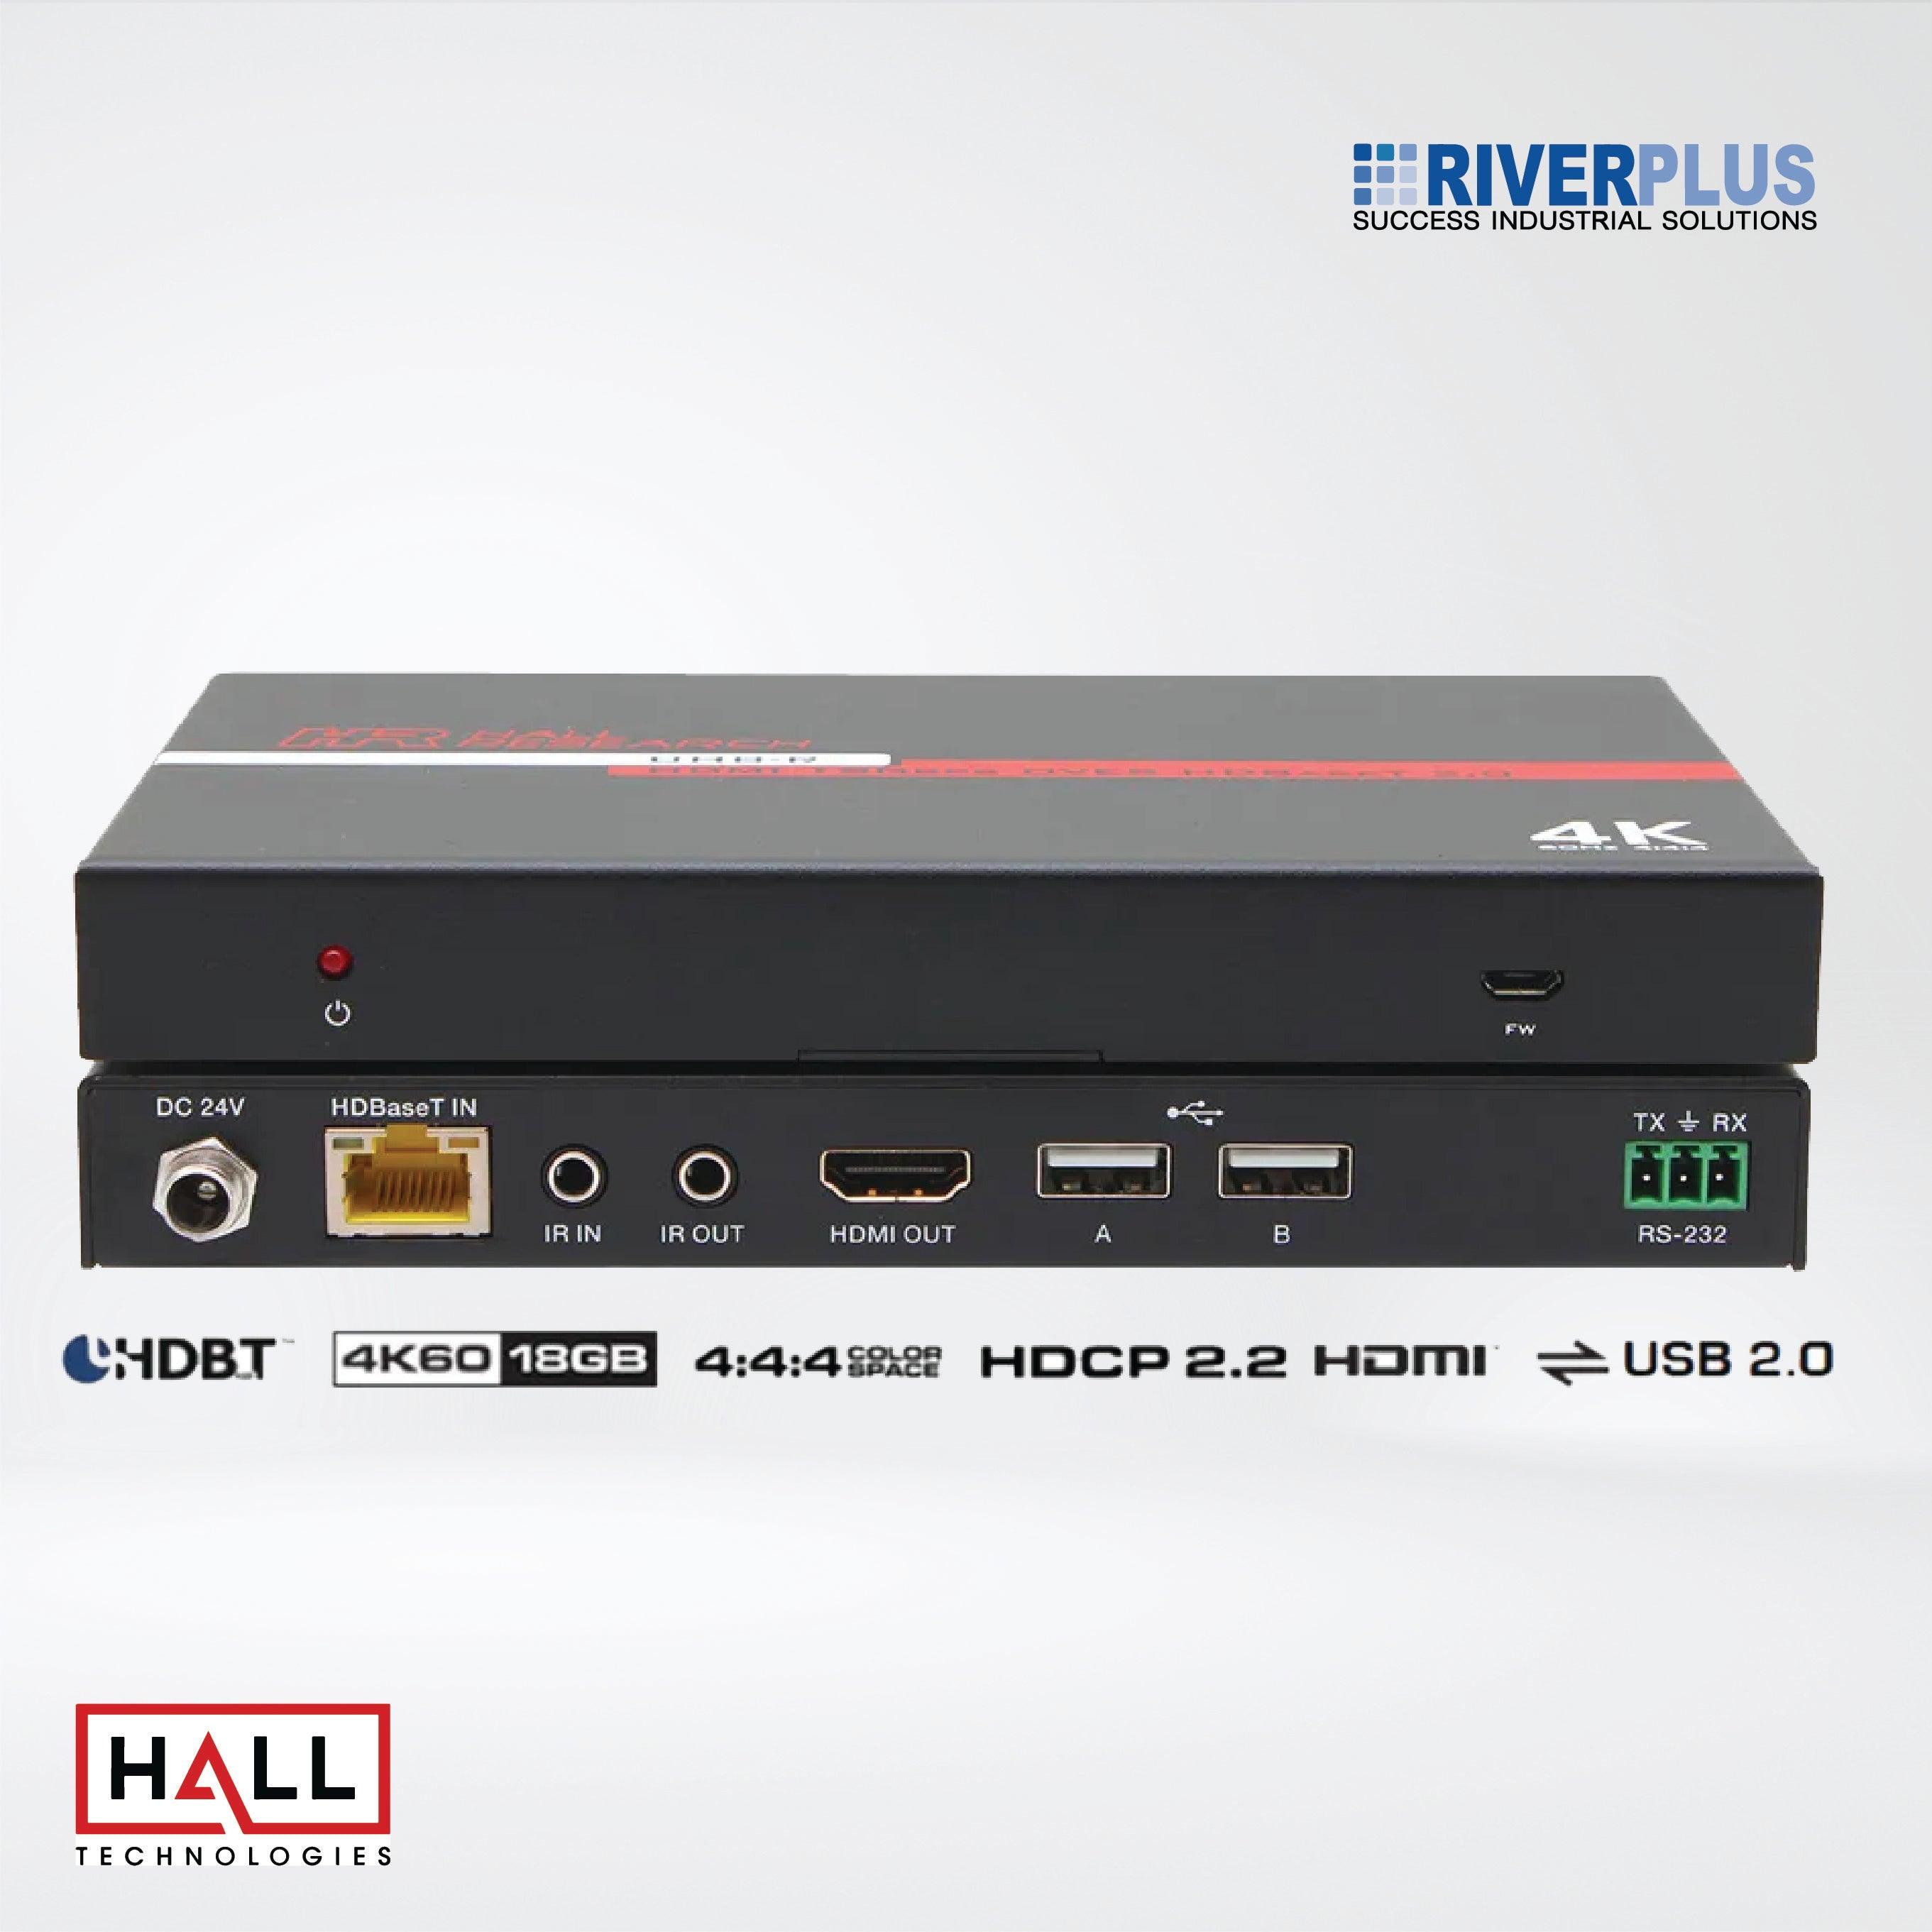 UHB-SW2 (Kit) Auto-Switching HDMI, VGA and USB Extension System - Riverplus